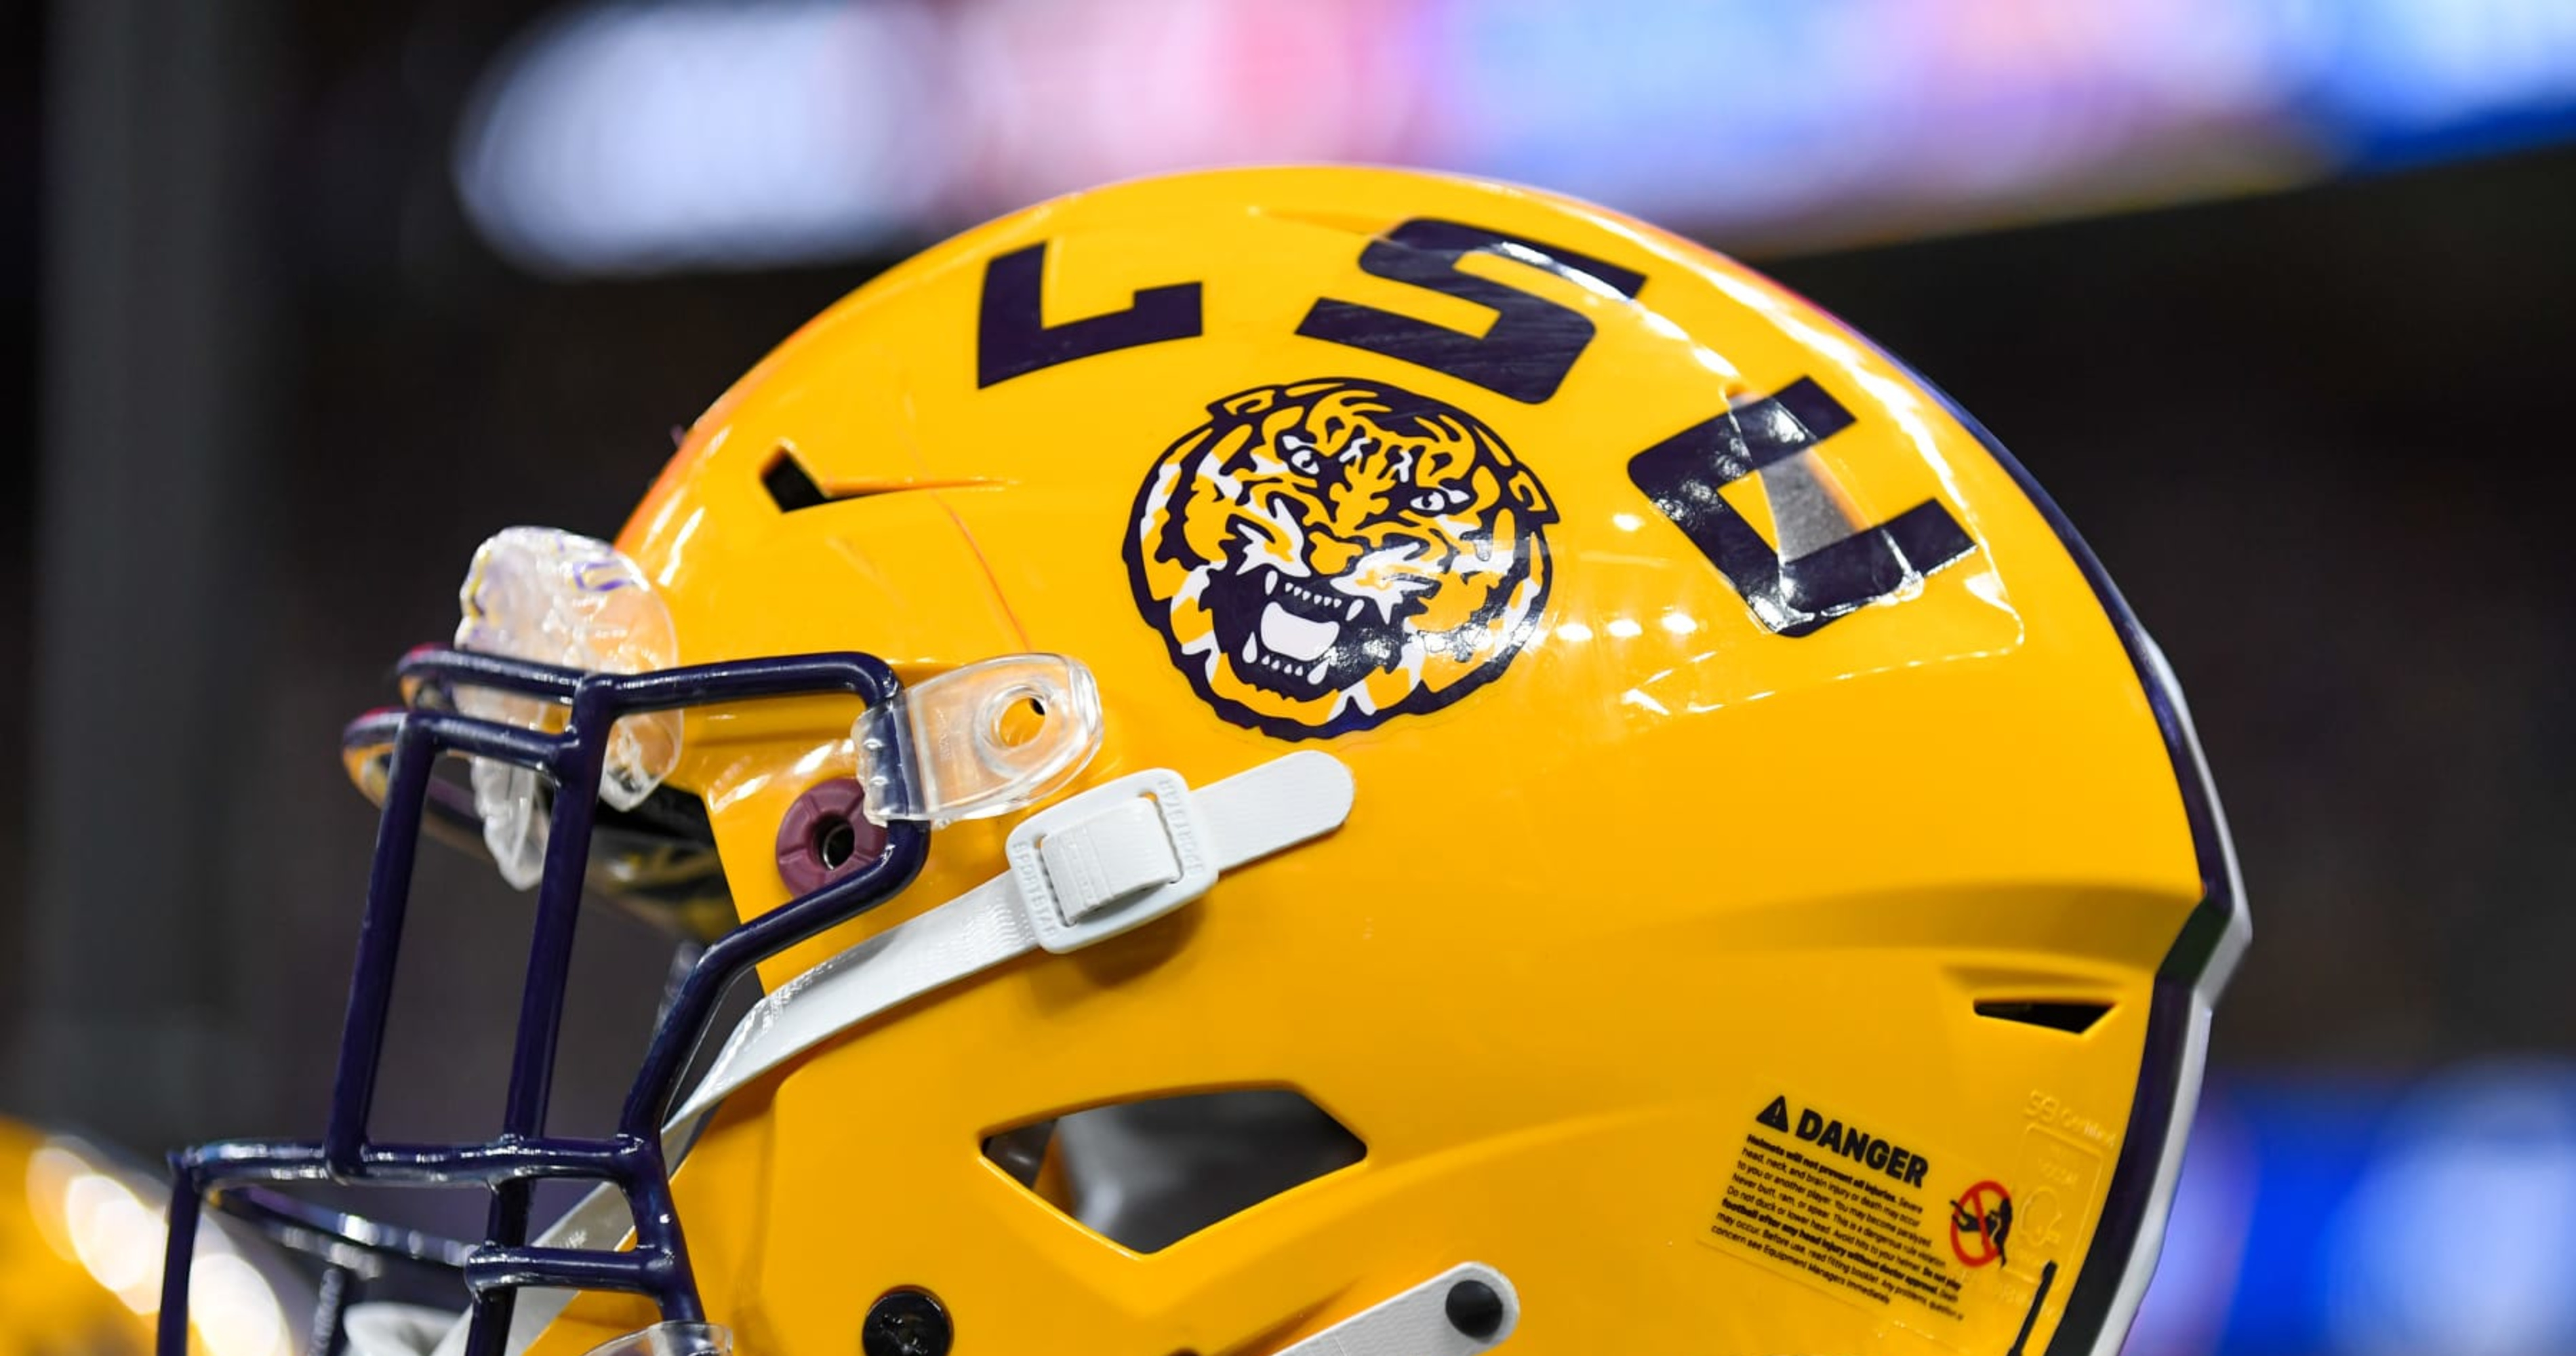 LSU Gets 1Year Probation from NCAA, Will Pay 5K Fine for CFB